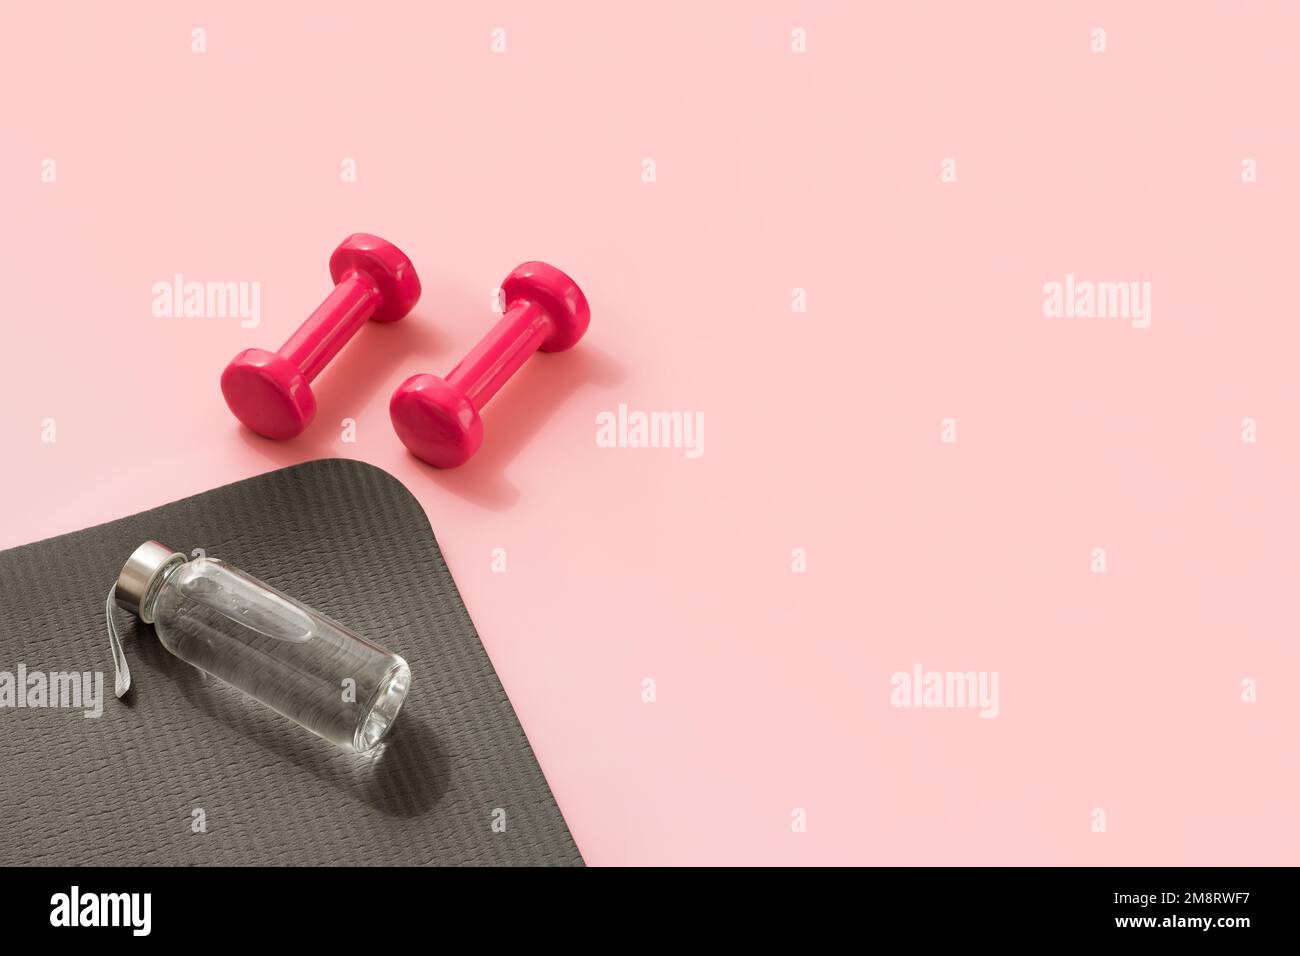 Stylish gray and pink fitness training and gym concept. Perspective view of gray sport mat, water bottle and pink dumbbells on pink background. Set for pilates, fitness with copy space Stock Photo